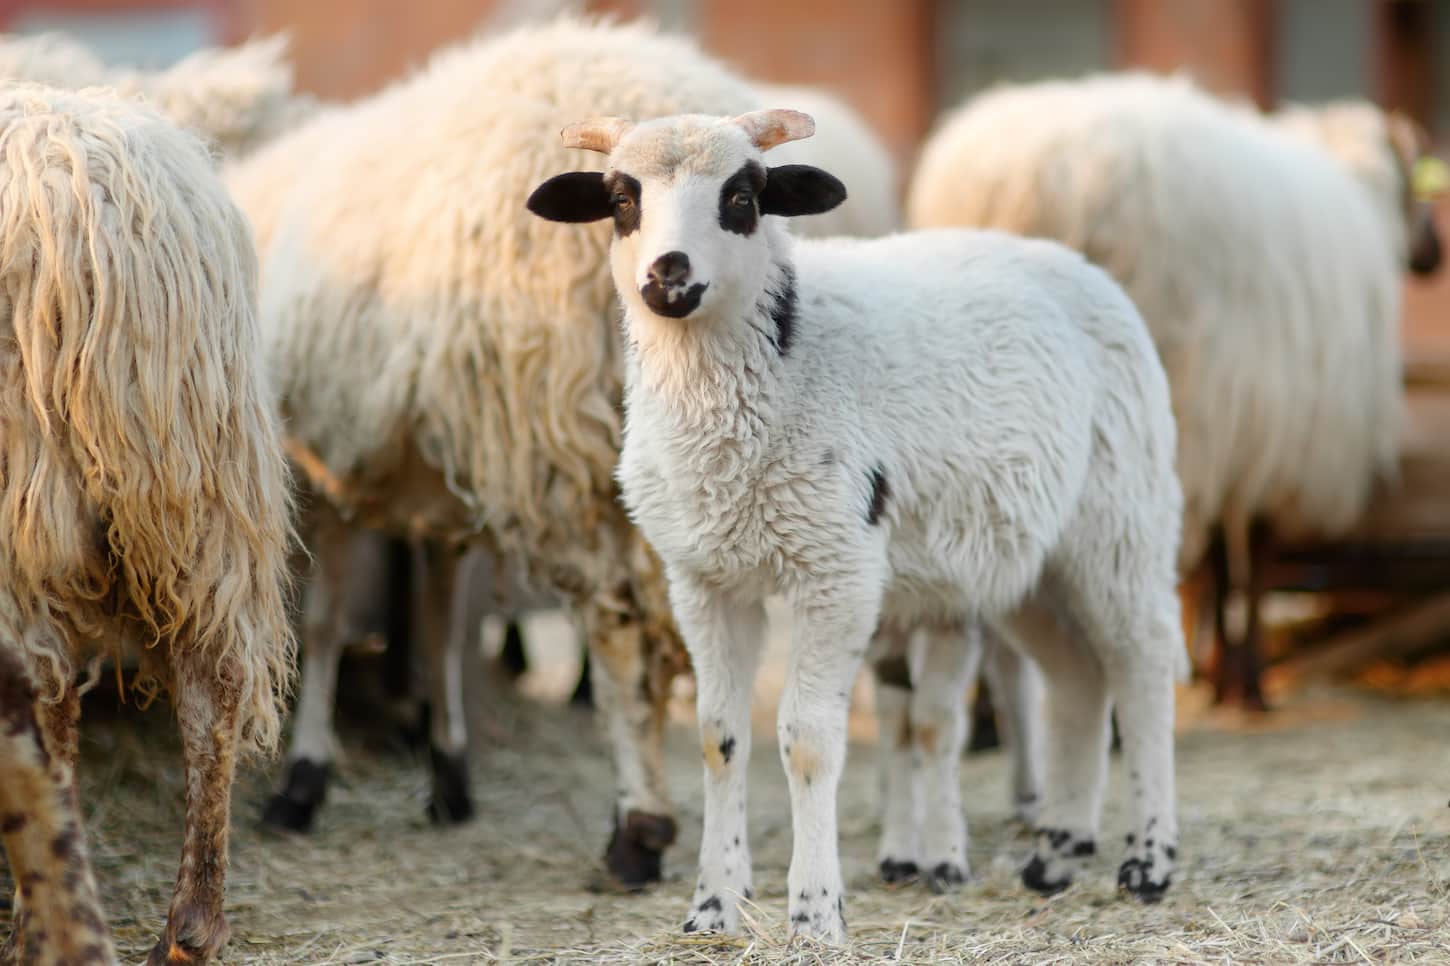 An image of a Small lamb on the background of sheeps in a corral on the farm.